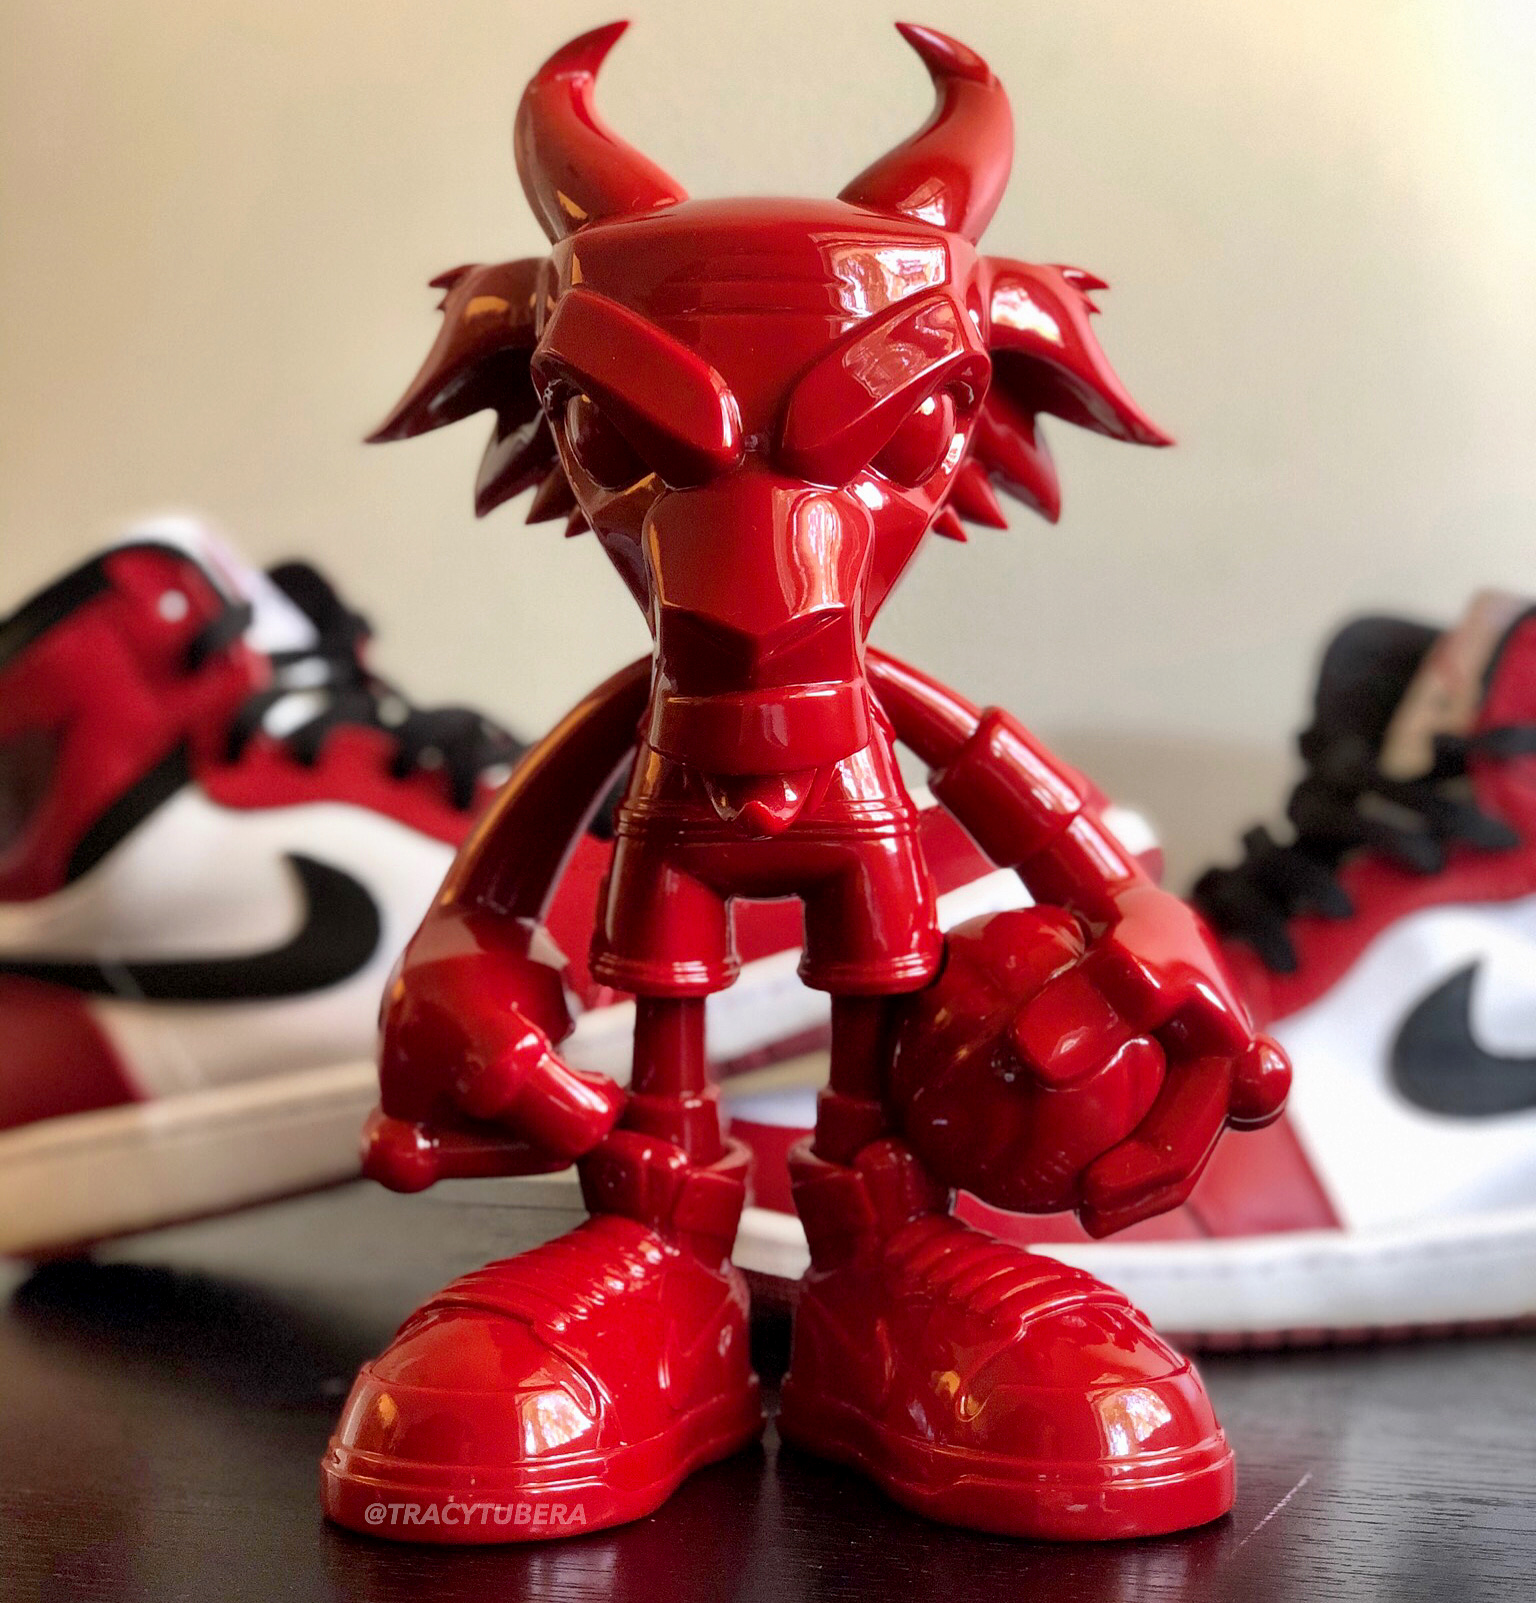 THE G.O.A.T. 'CHICAGO RED' EDITION